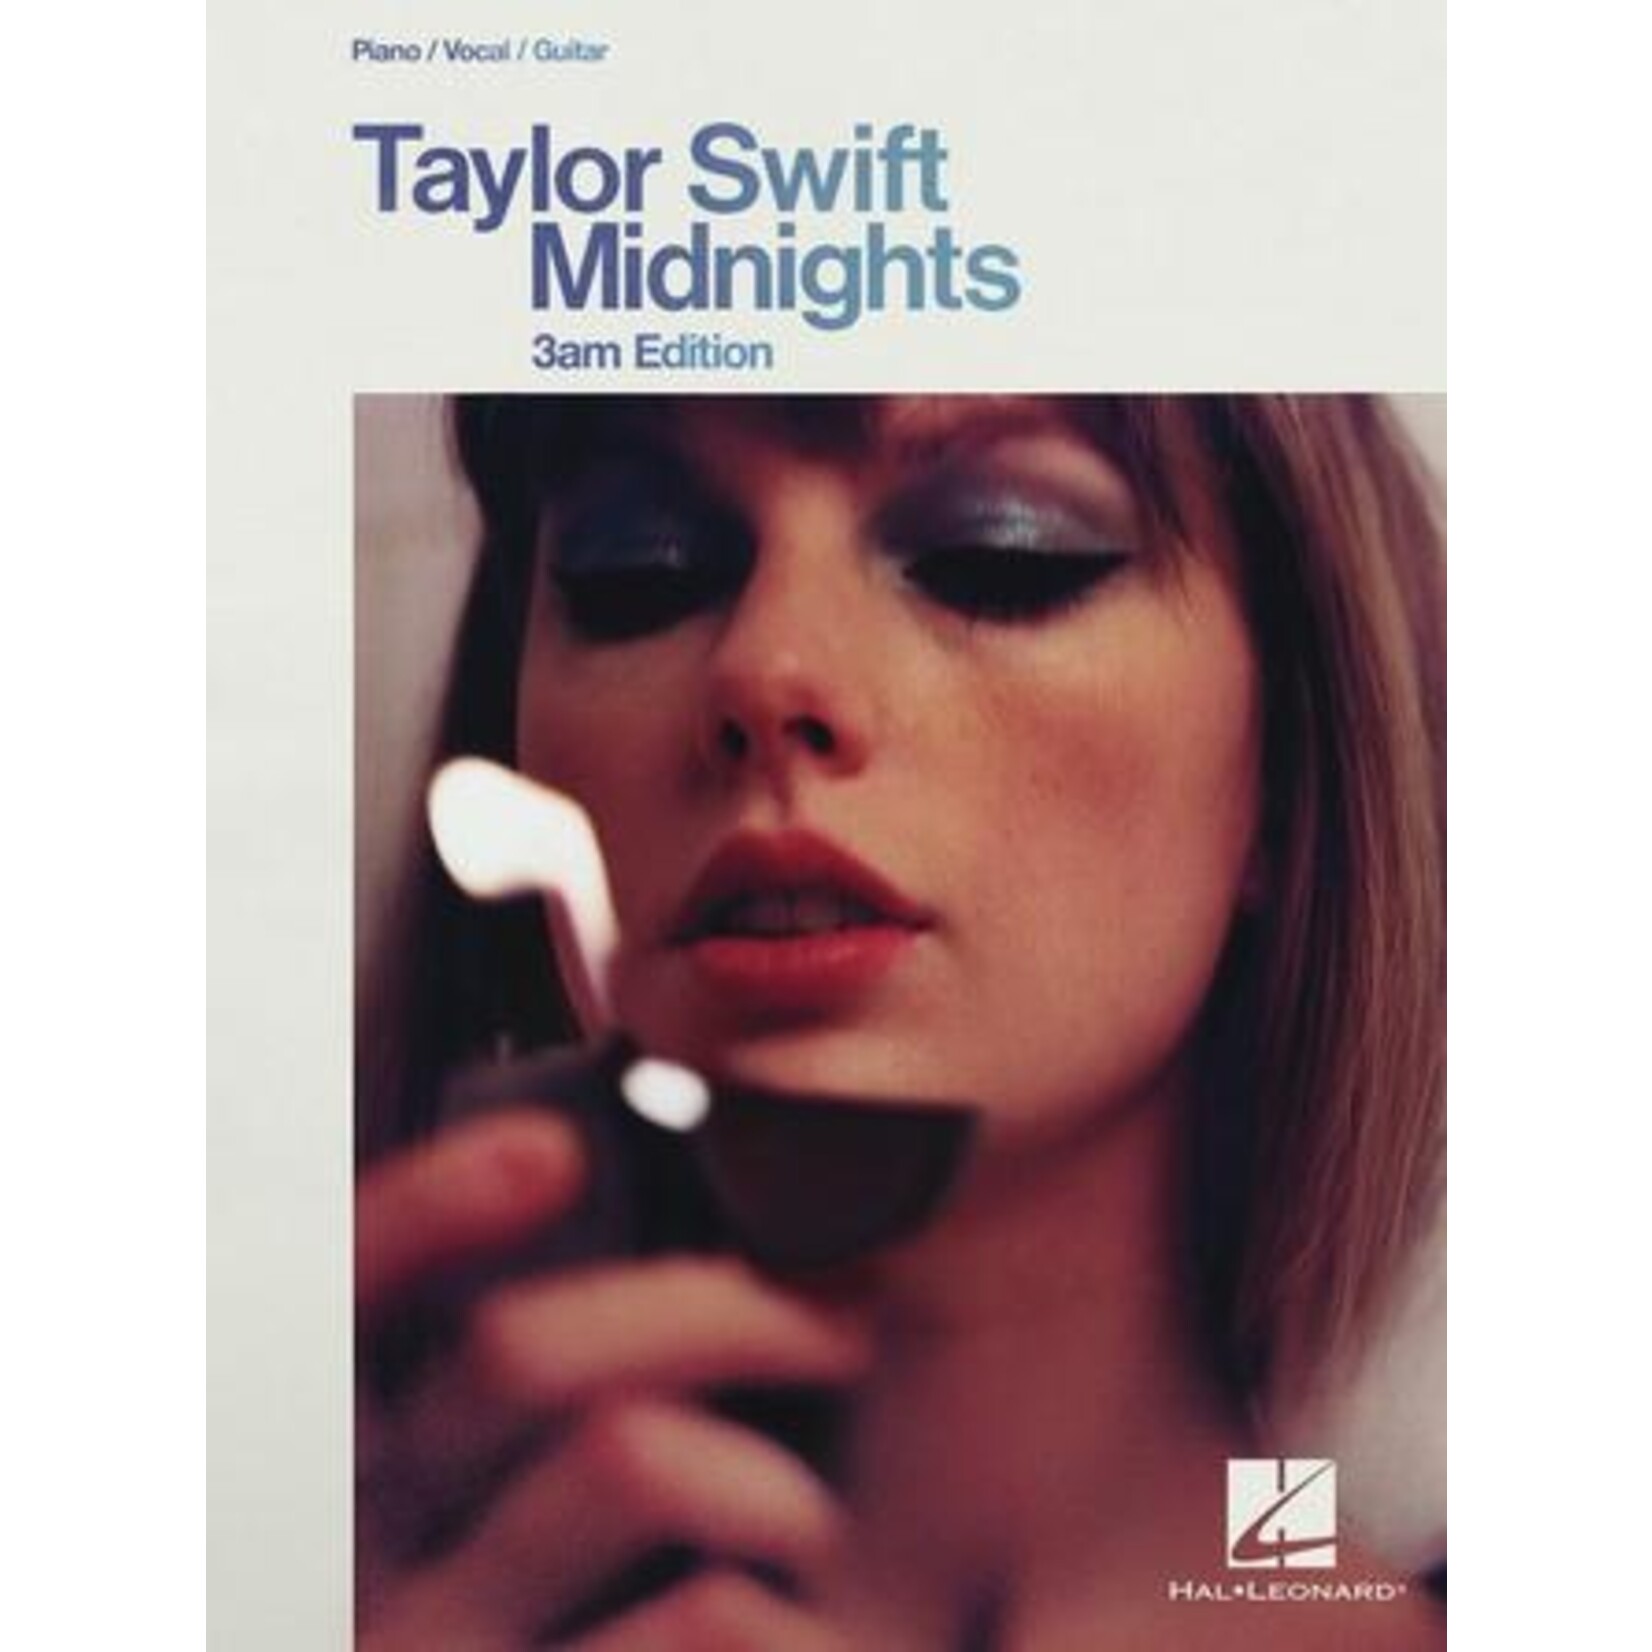 Taylor Swift Midnights 3am Edition - Piano/Vocal/Guitar